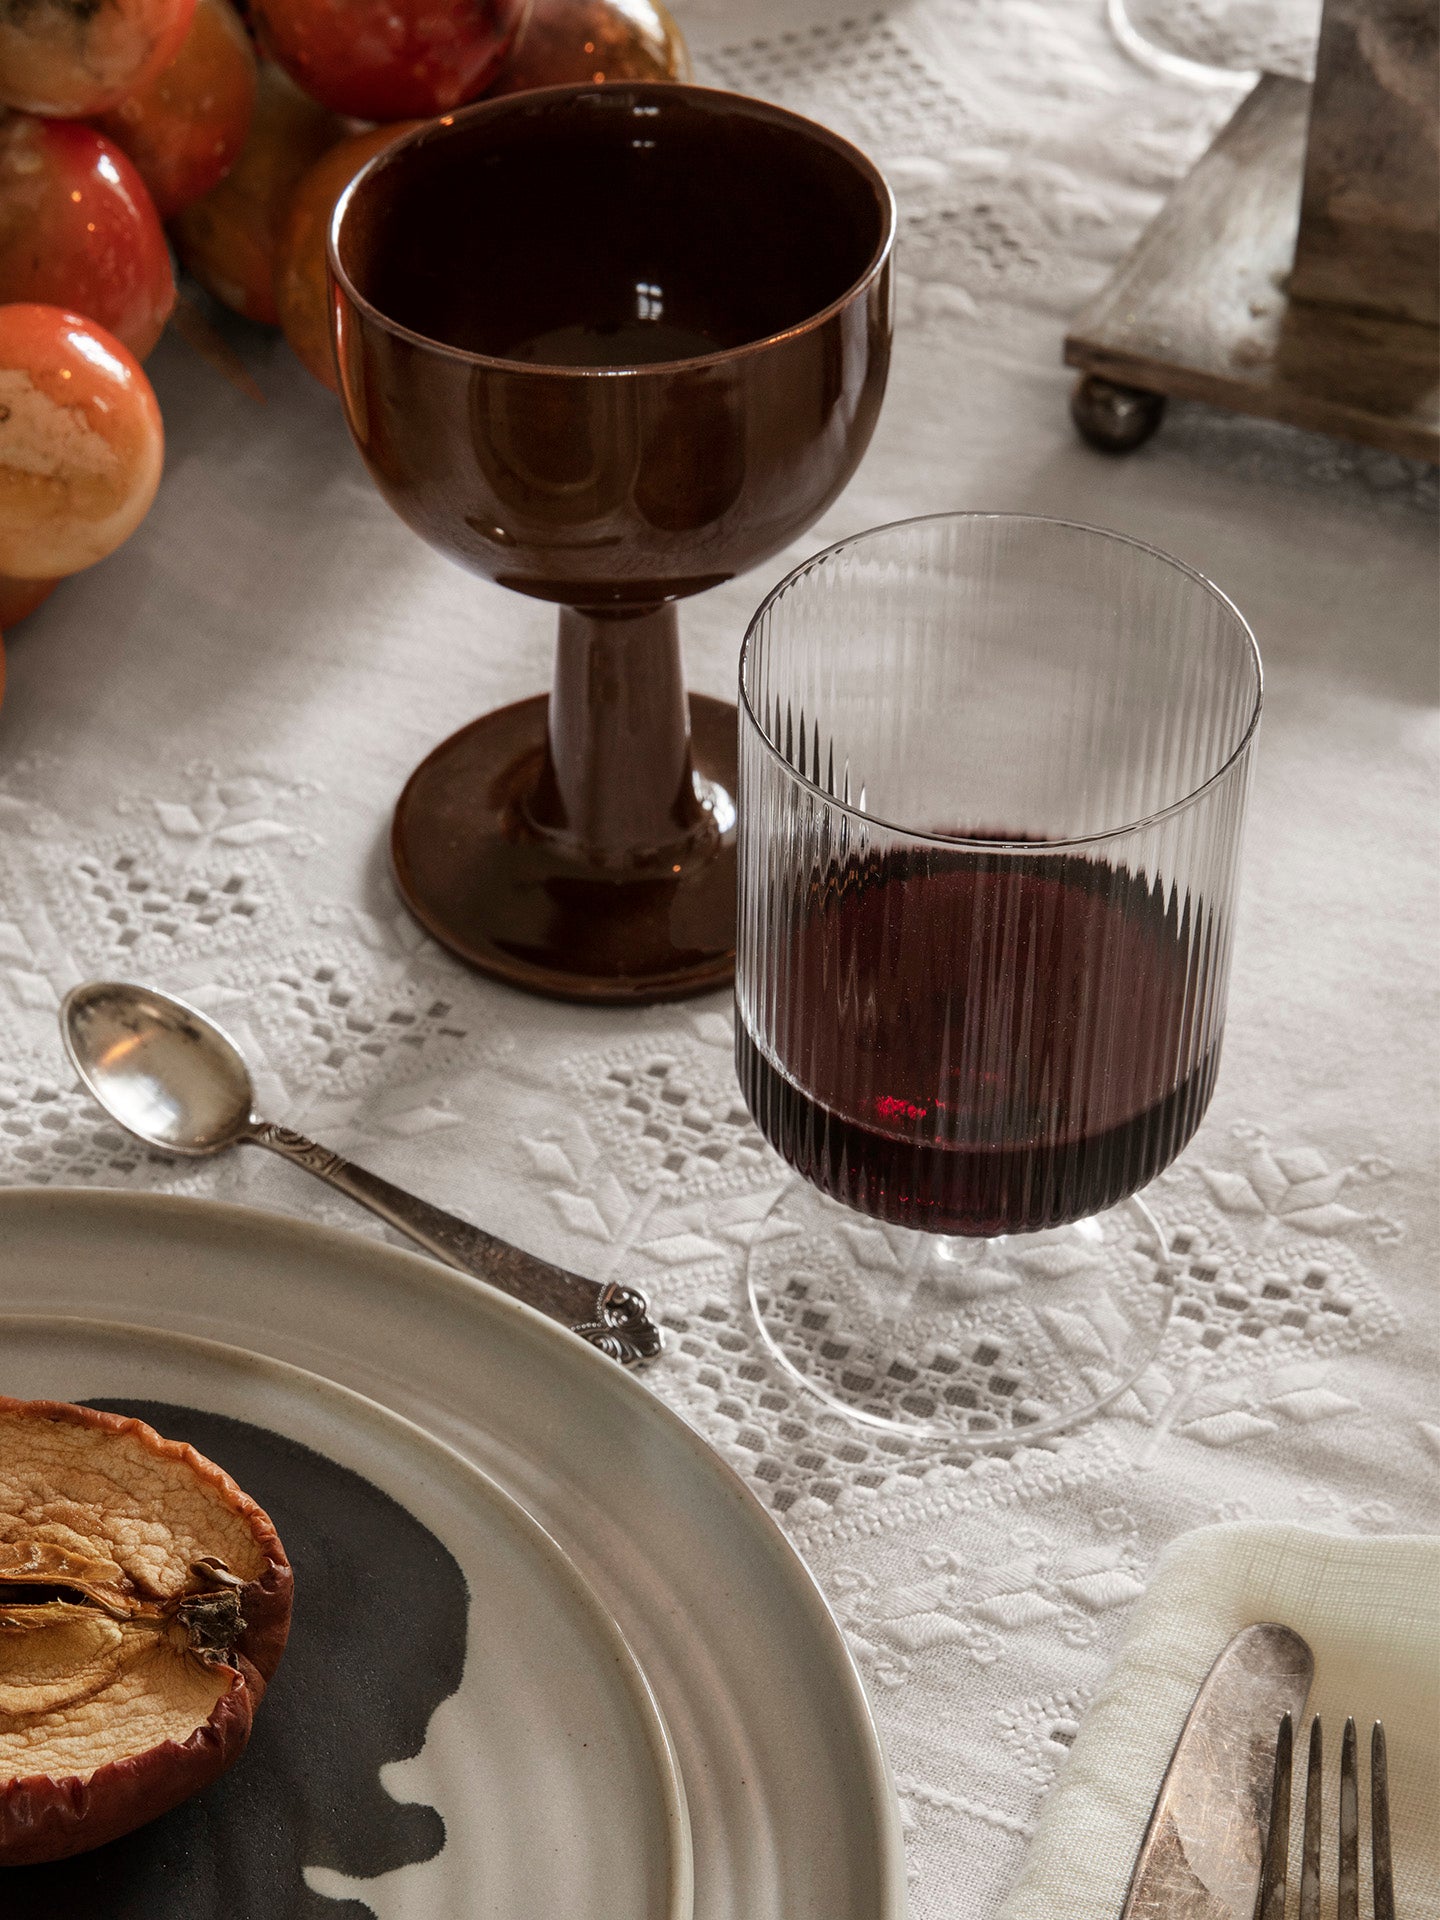 Ripple wine glasses, clear or smoked grey